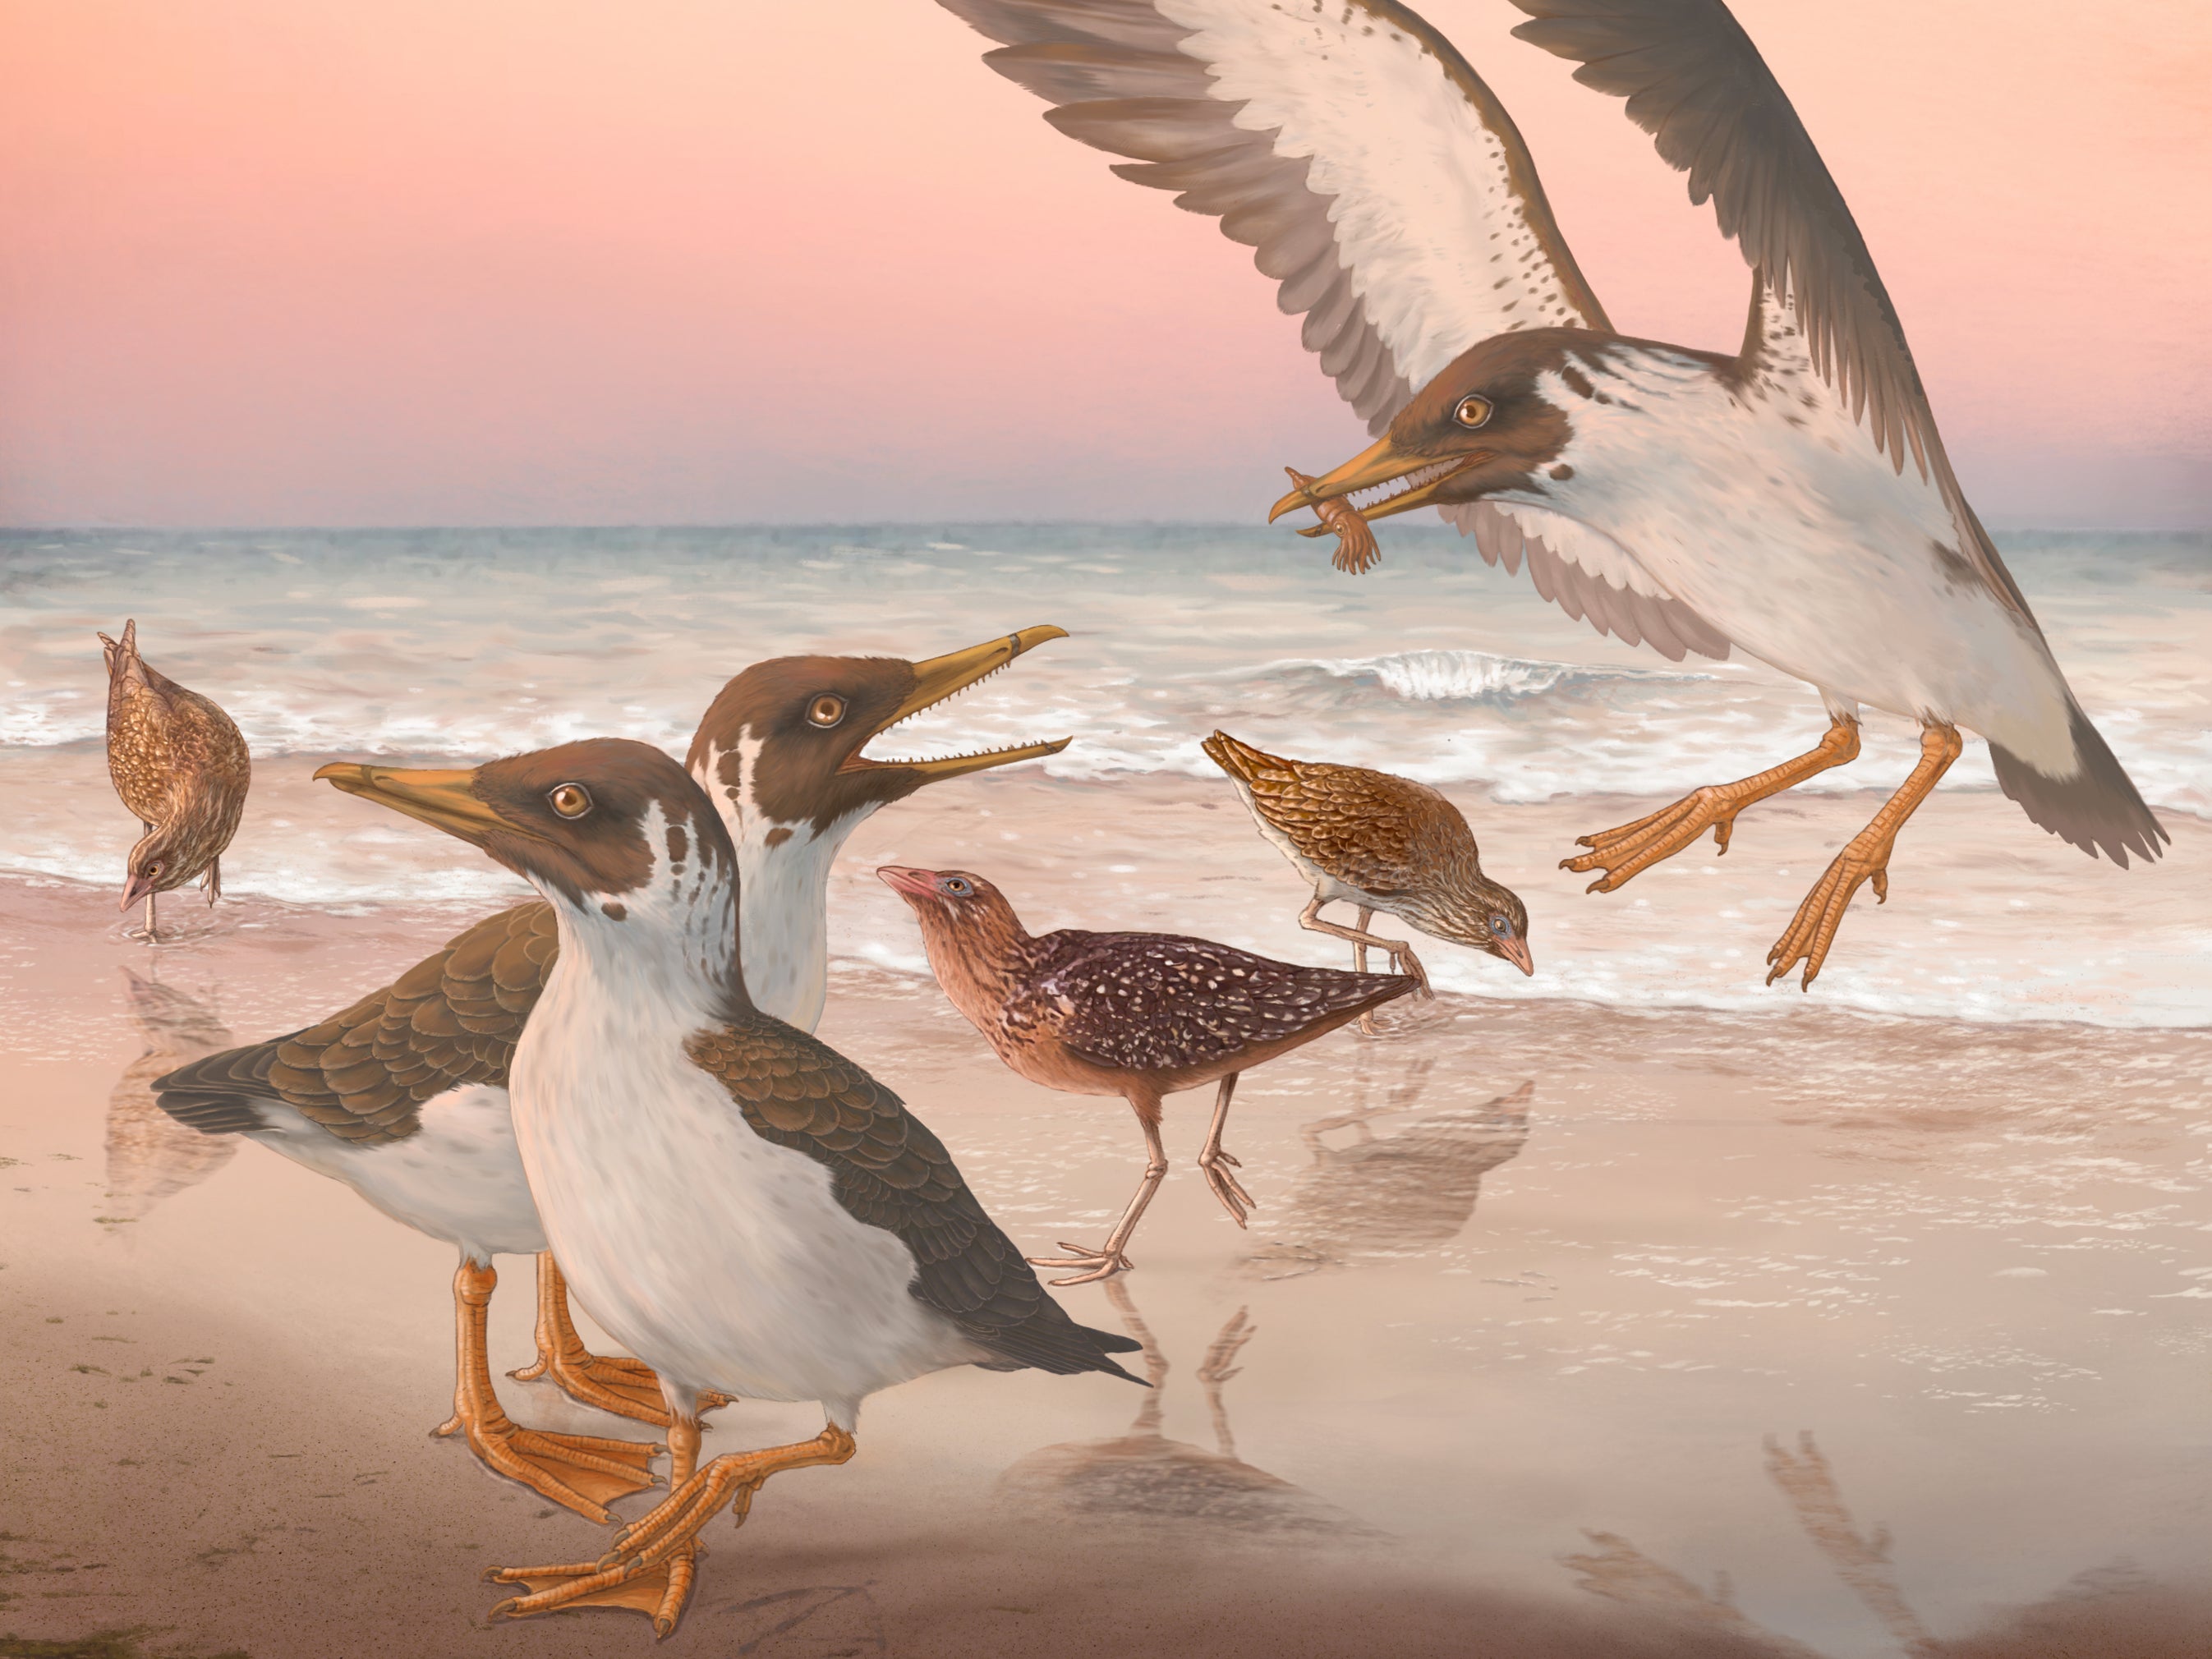 Artist’s reconstruction of the last known toothed bird, Janavis finalidens, in its original environment